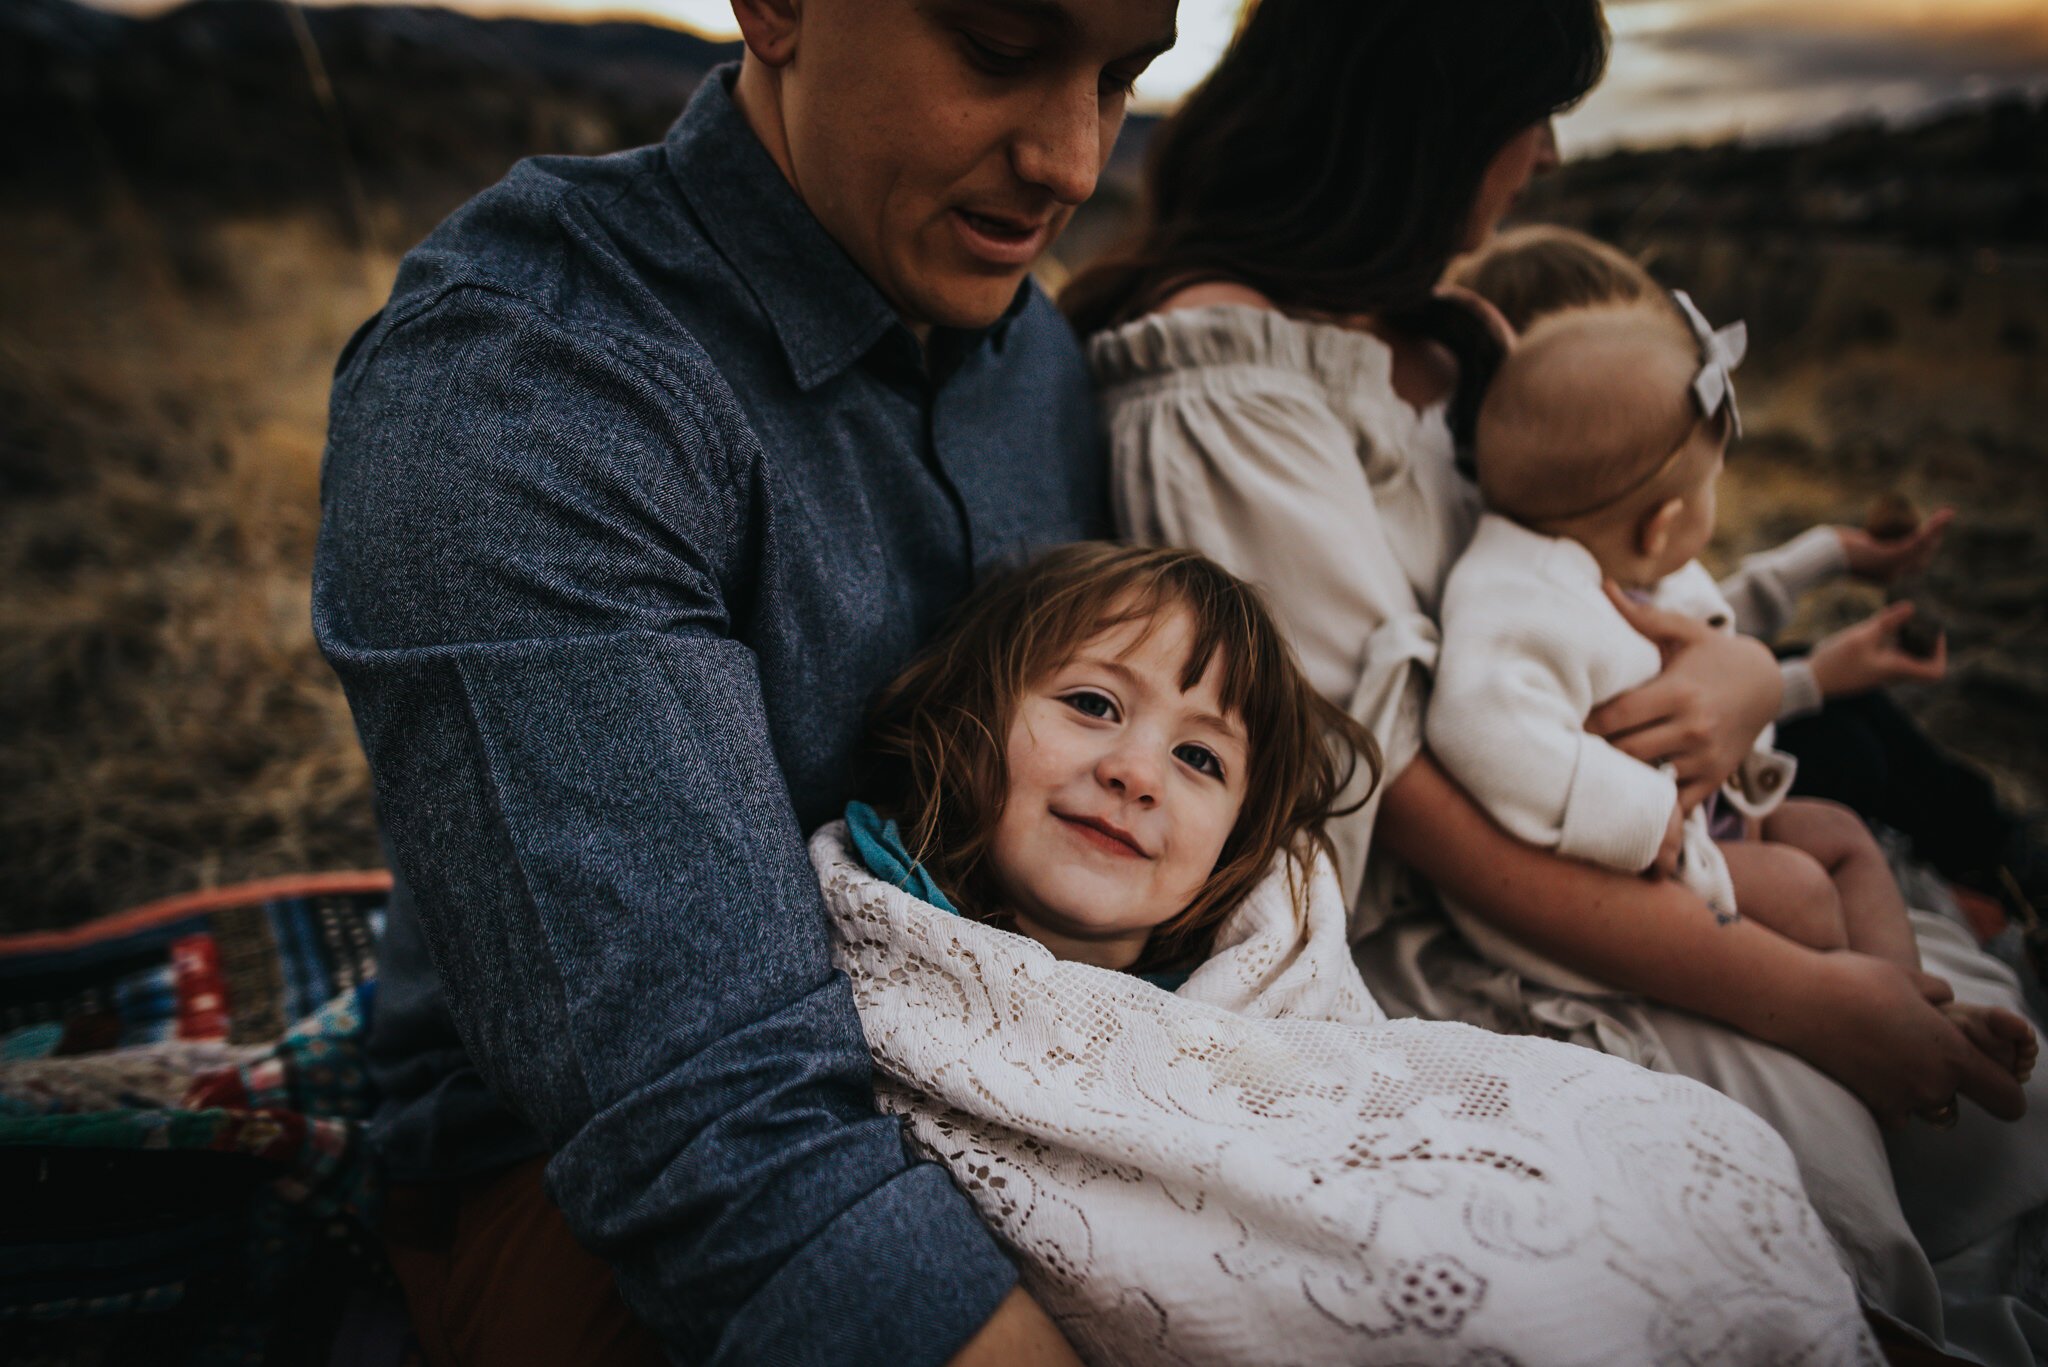 Miller+Family+Session+Mentorship+Colorado+Springs+Colorado+Sunset+Ute+Valley+Park+Mountains+Fields+Mom+Dad+Son+Daughter+Baby+Wild+Prairie+Photography-33-2020.jpeg